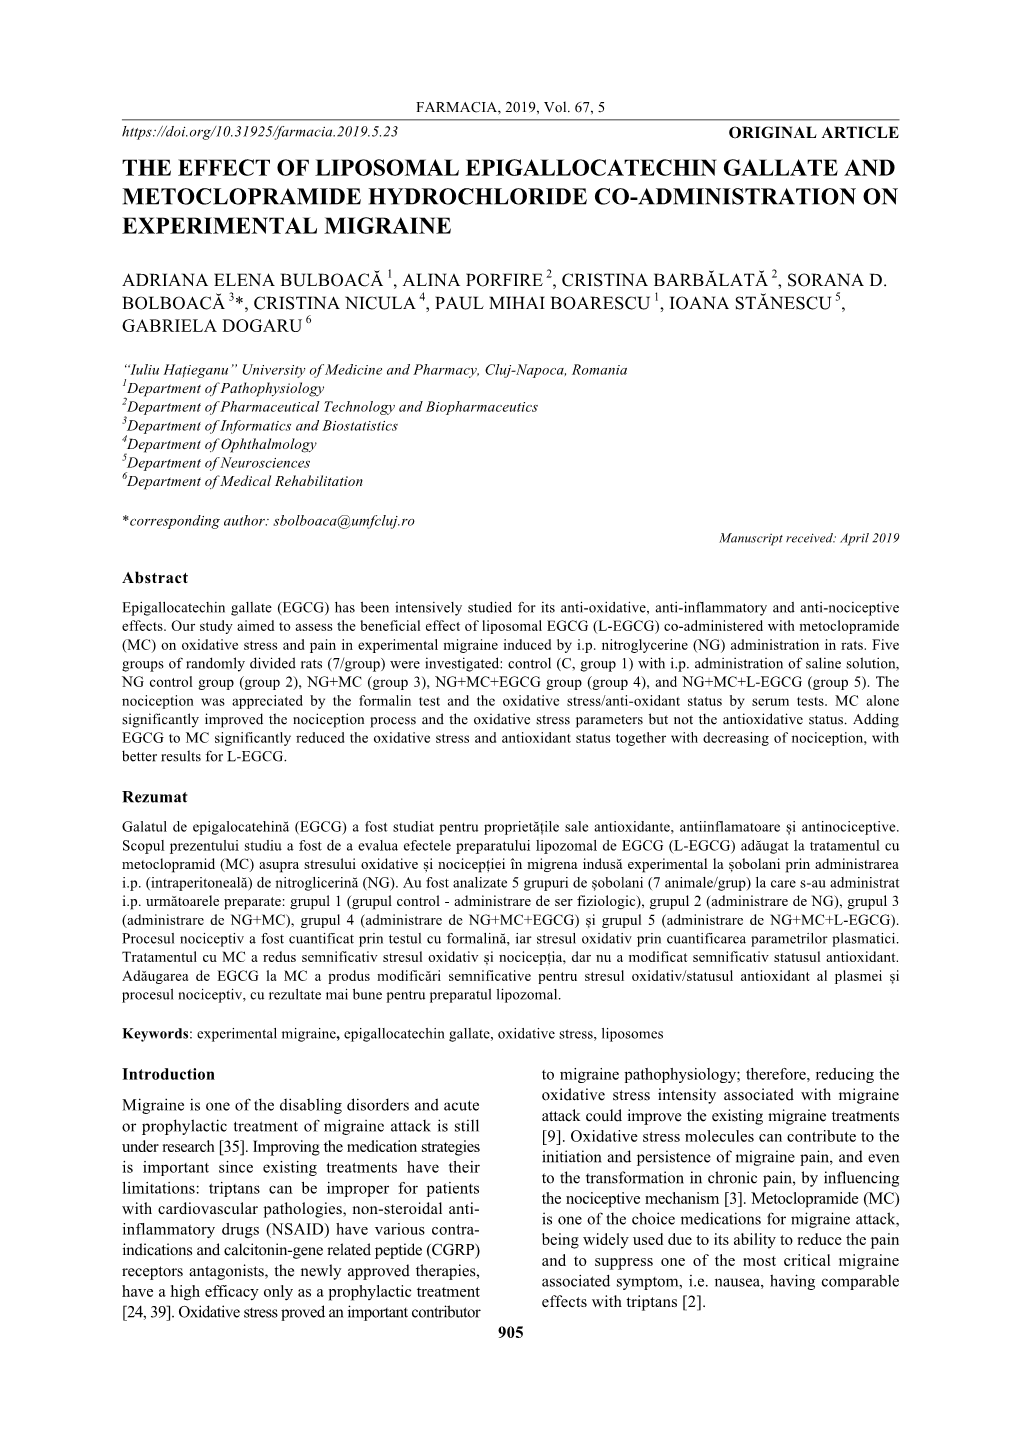 The Effect of Liposomal Epigallocatechin Gallate and Metoclopramide Hydrochloride Co-Administration on Experimental Migraine